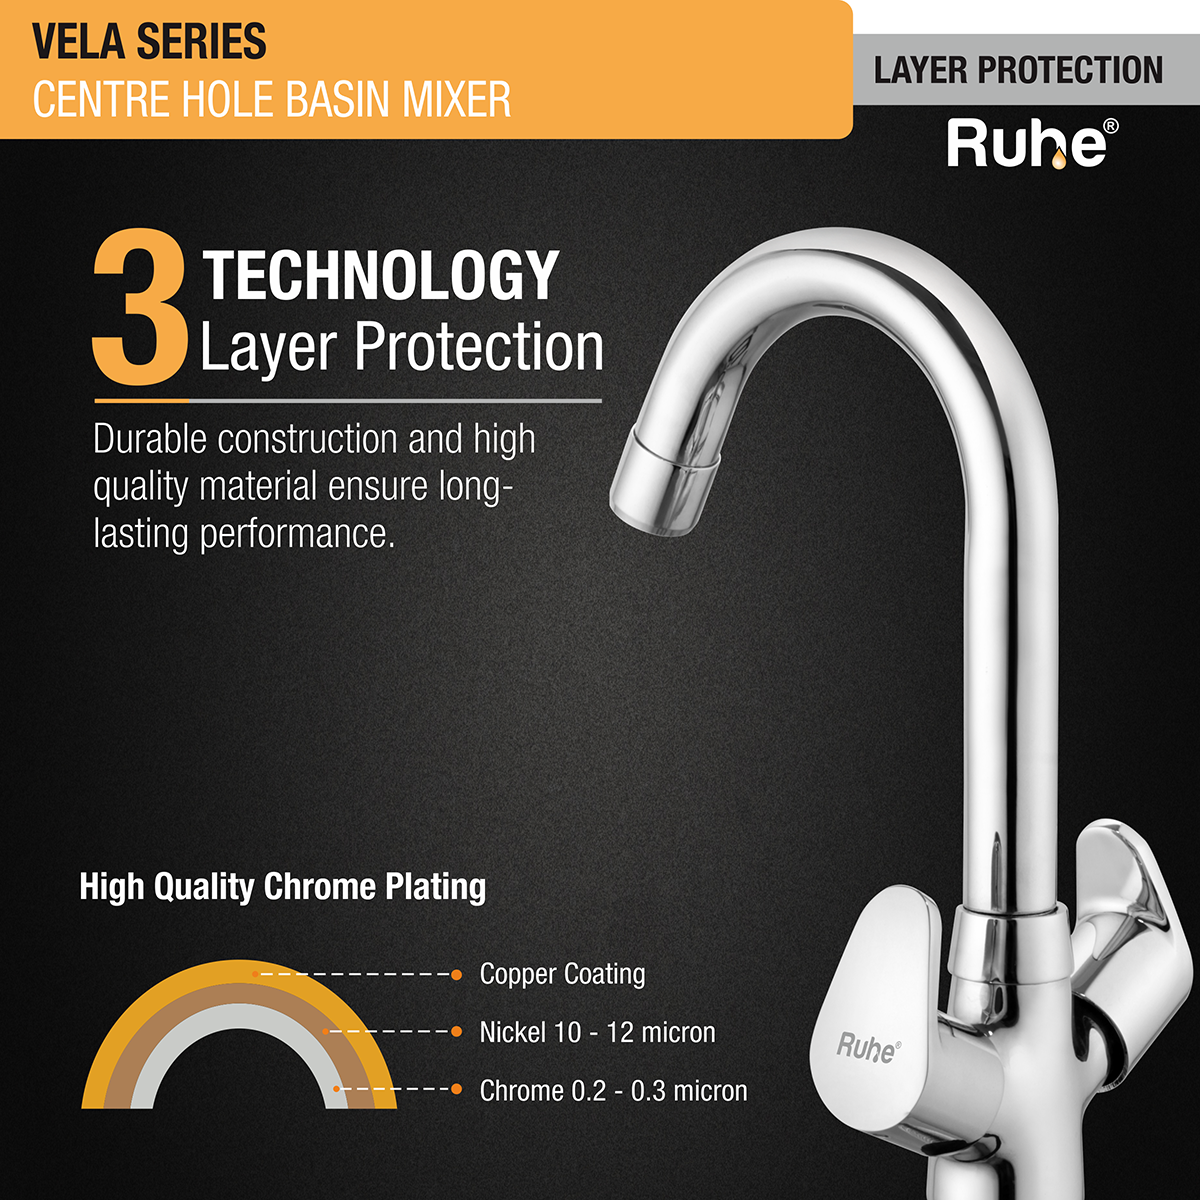 Vela Centre Hole Basin Mixer with Small (12 inches) Round Swivel Spout Faucet 3 layer protection